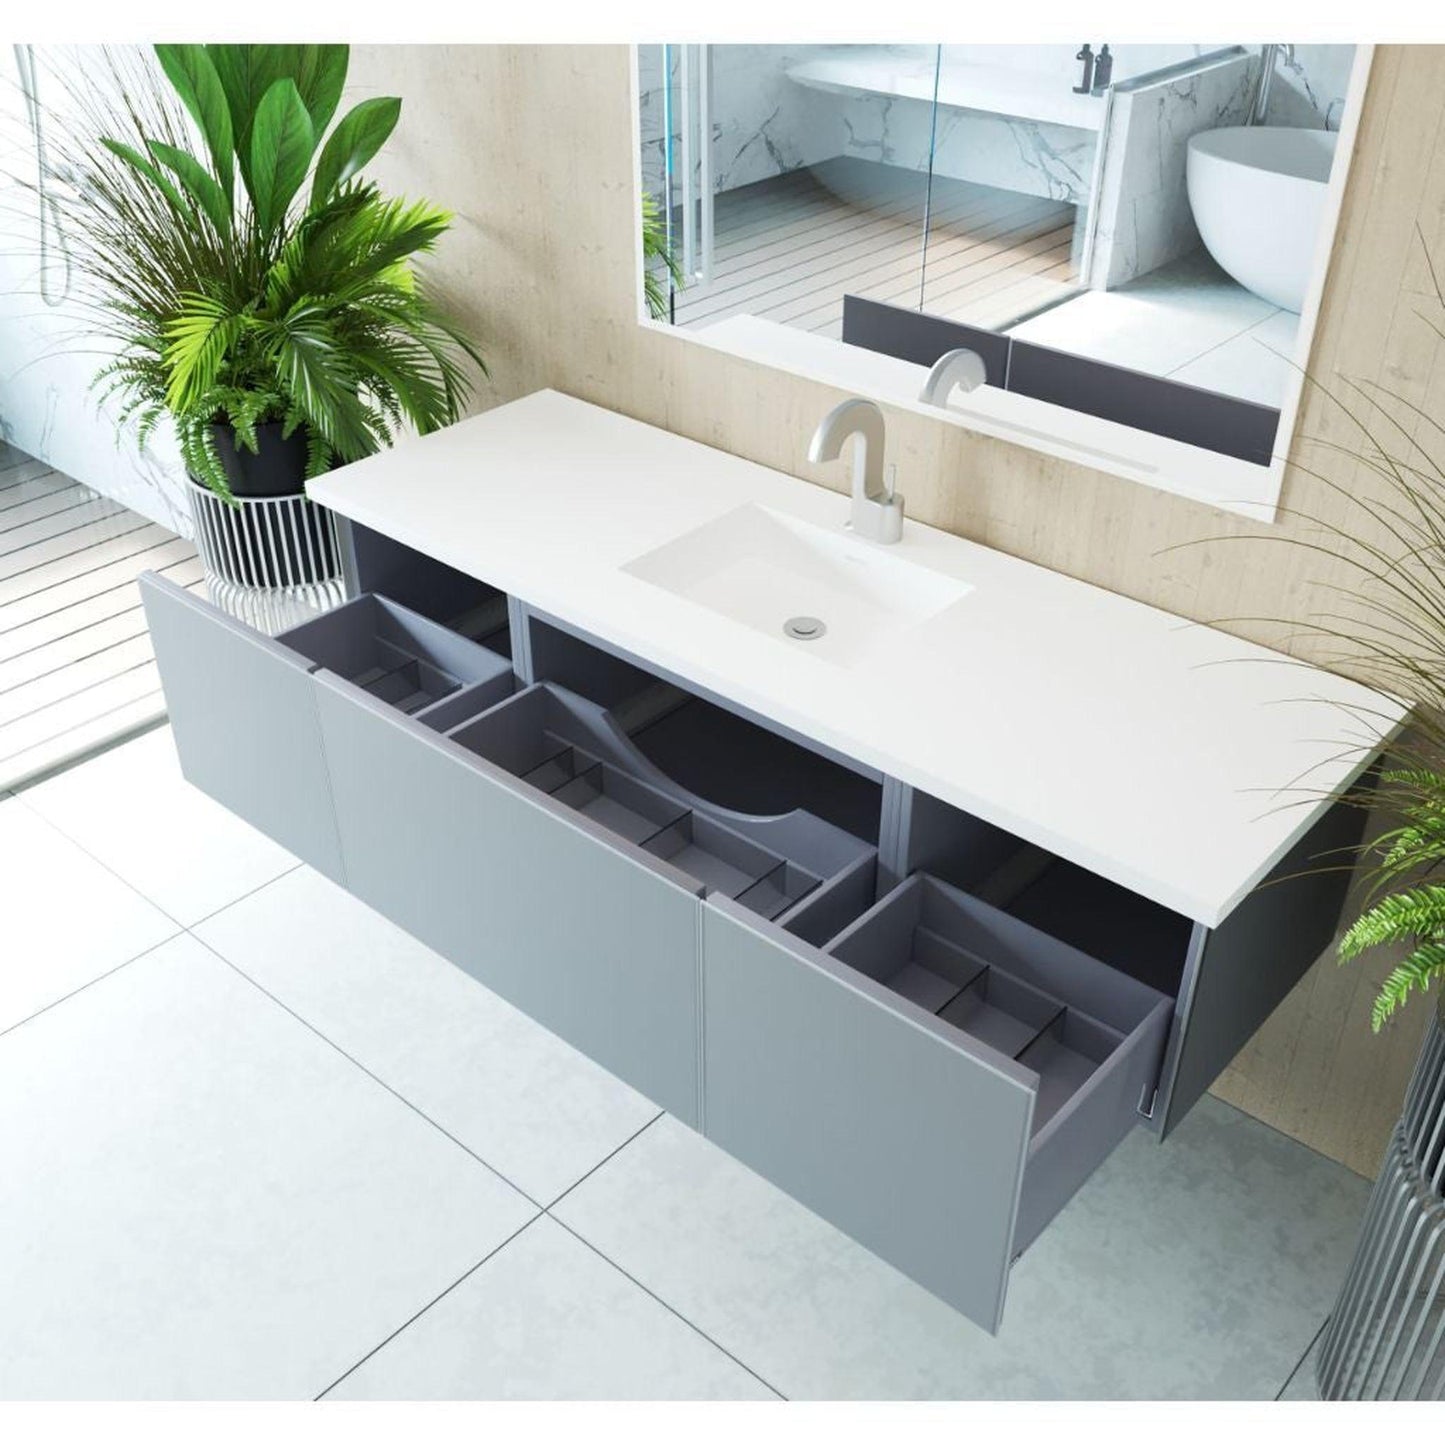 Laviva Vitri 66" Fossil Gray Vanity Base and Matte White Solid Surface Countertop With Integrated Sink